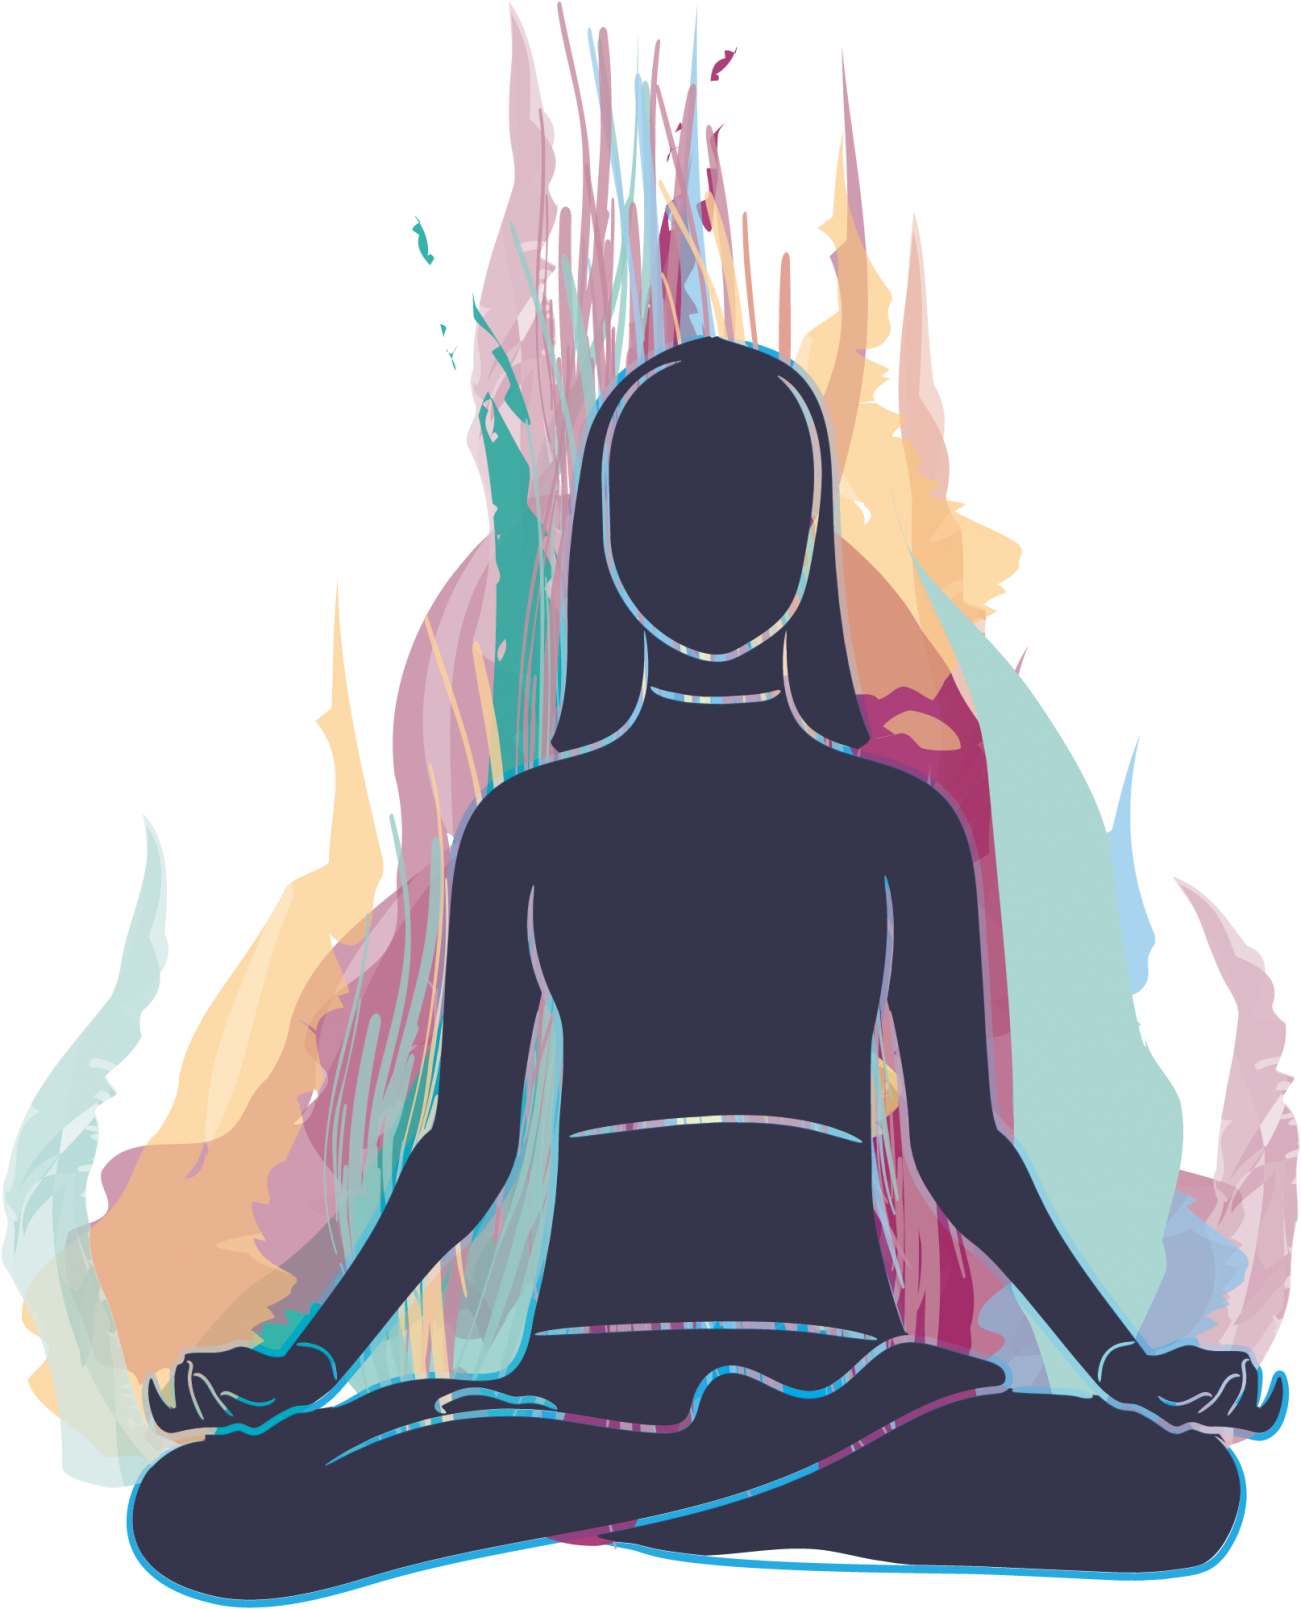 A Silhouette Of A Woman Sitting In A Lotus Position